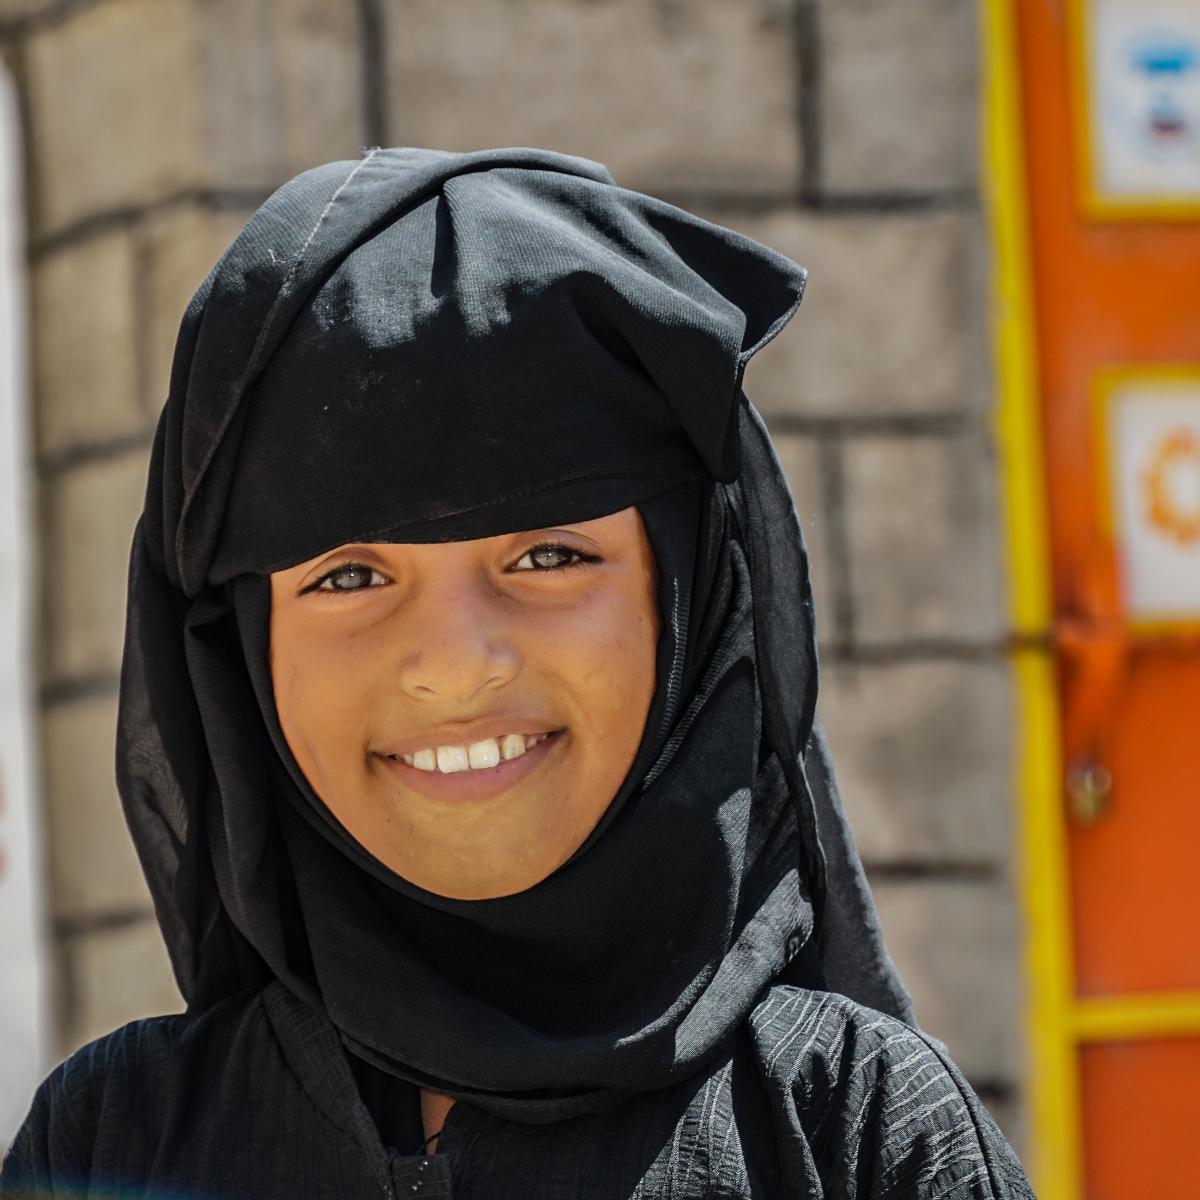 In Yemen, the lack of latrines near homes exposes girls like Rahma* to many health and safety risks. 